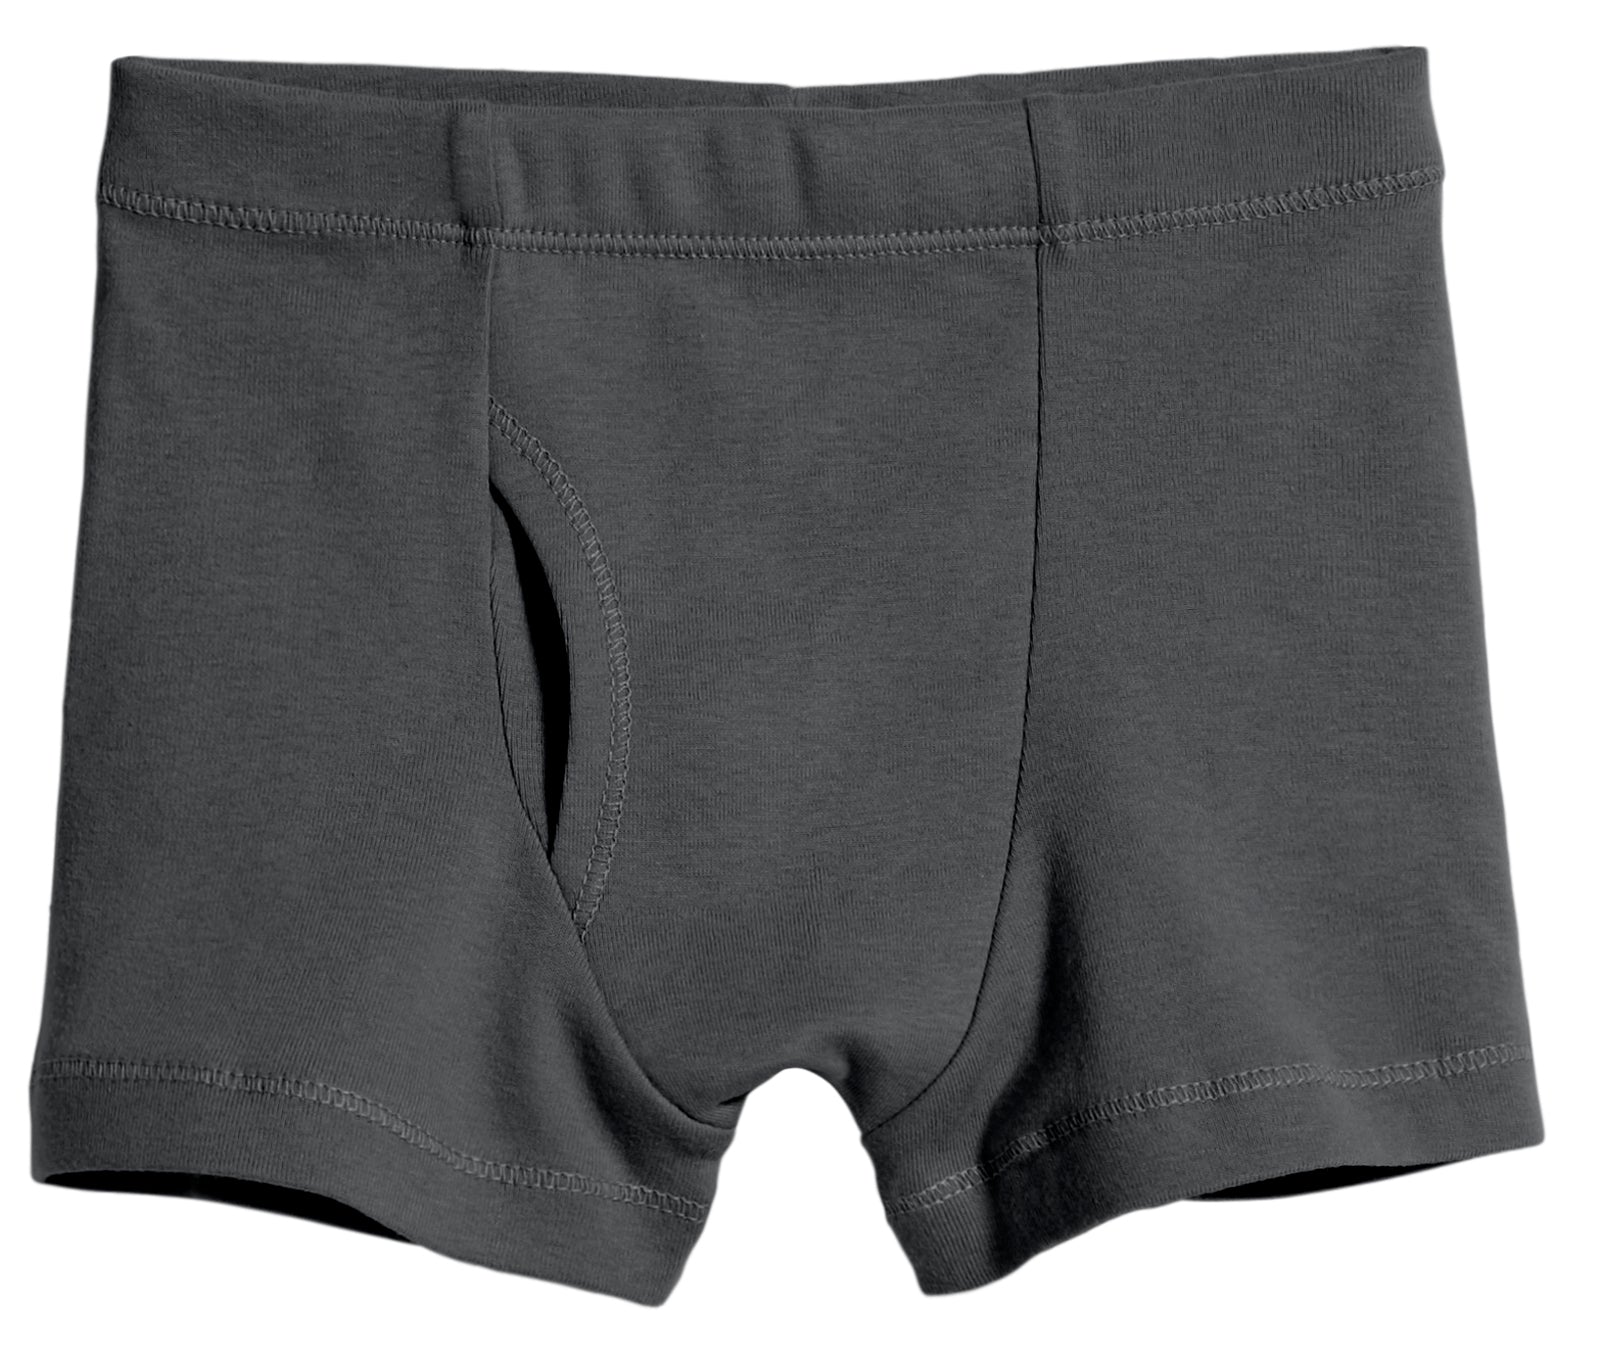 Women's Basics Boxer Briefs (Bamboo Spandex, 2 Pack) - Charcoal